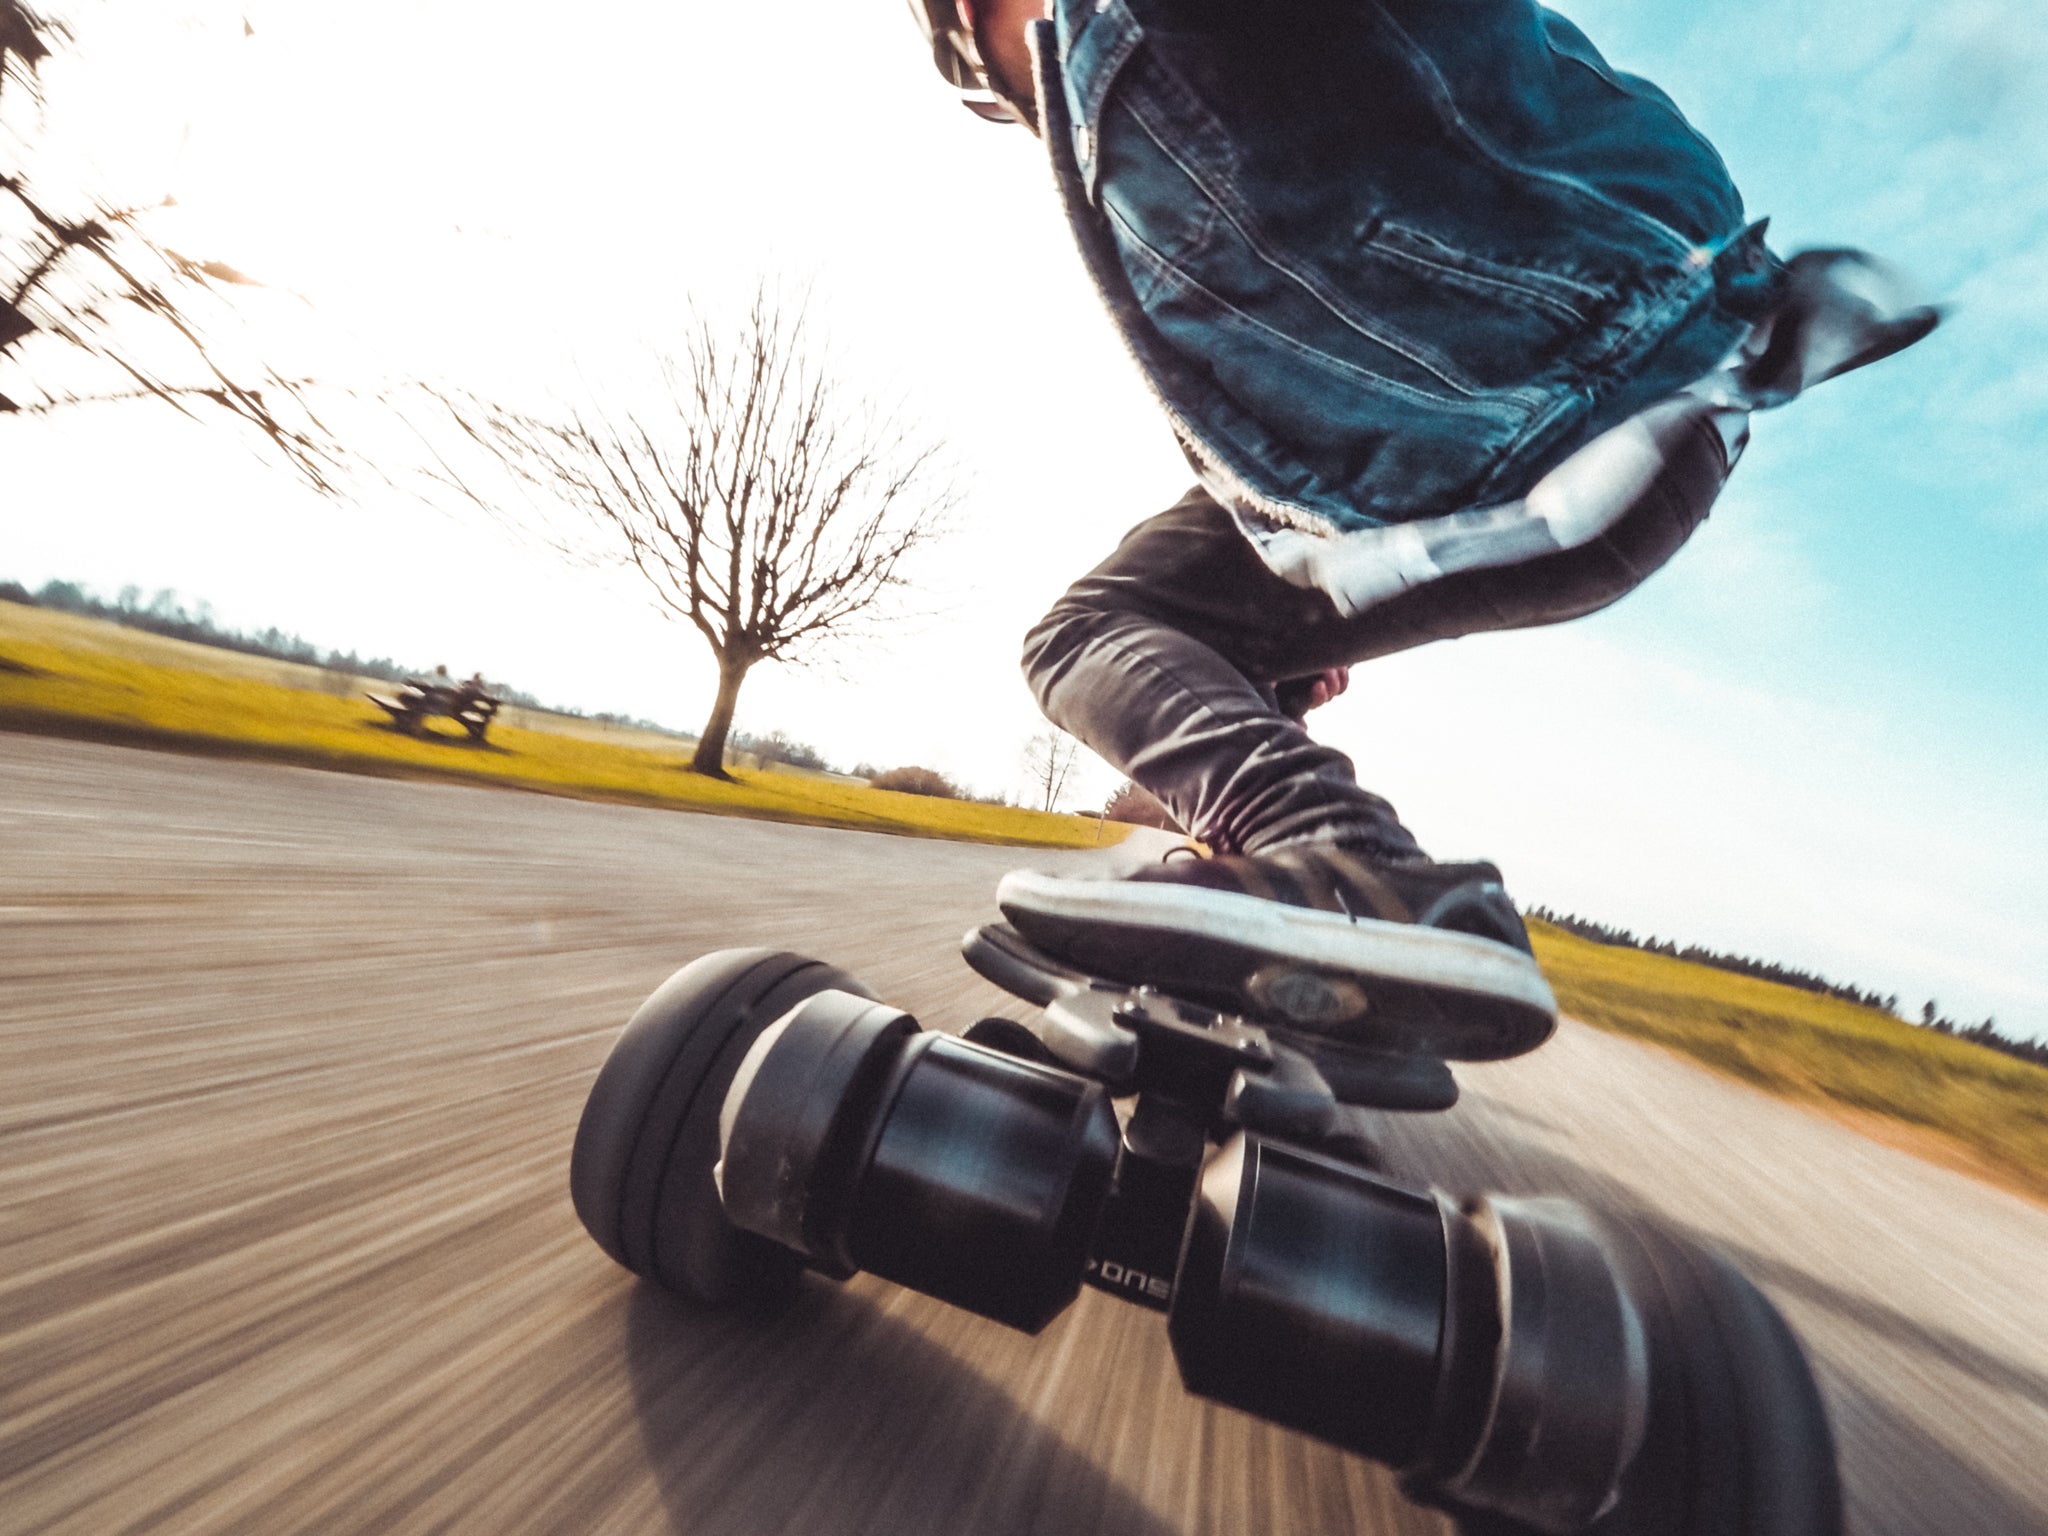 he best electric Skateboard 2 in 1. ONSRA Black Carve 2 Belt Drive with 115mm Rubber Wheels or 150mm AT wheels. Electric Longboard with double kingpin and Belt Drive.